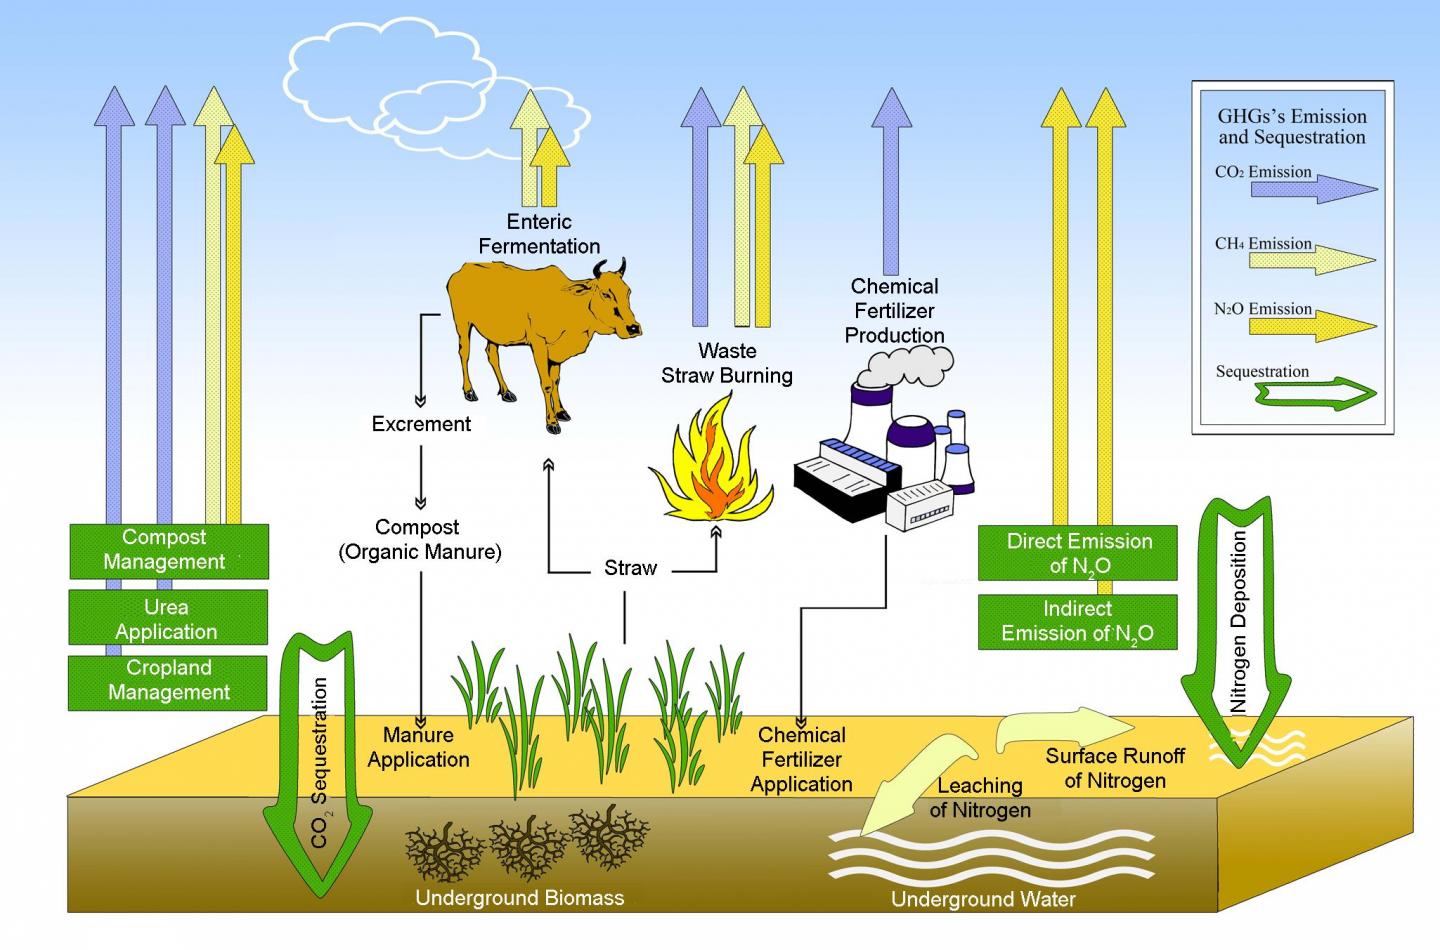 Processes of Greenhouse Gases Emission